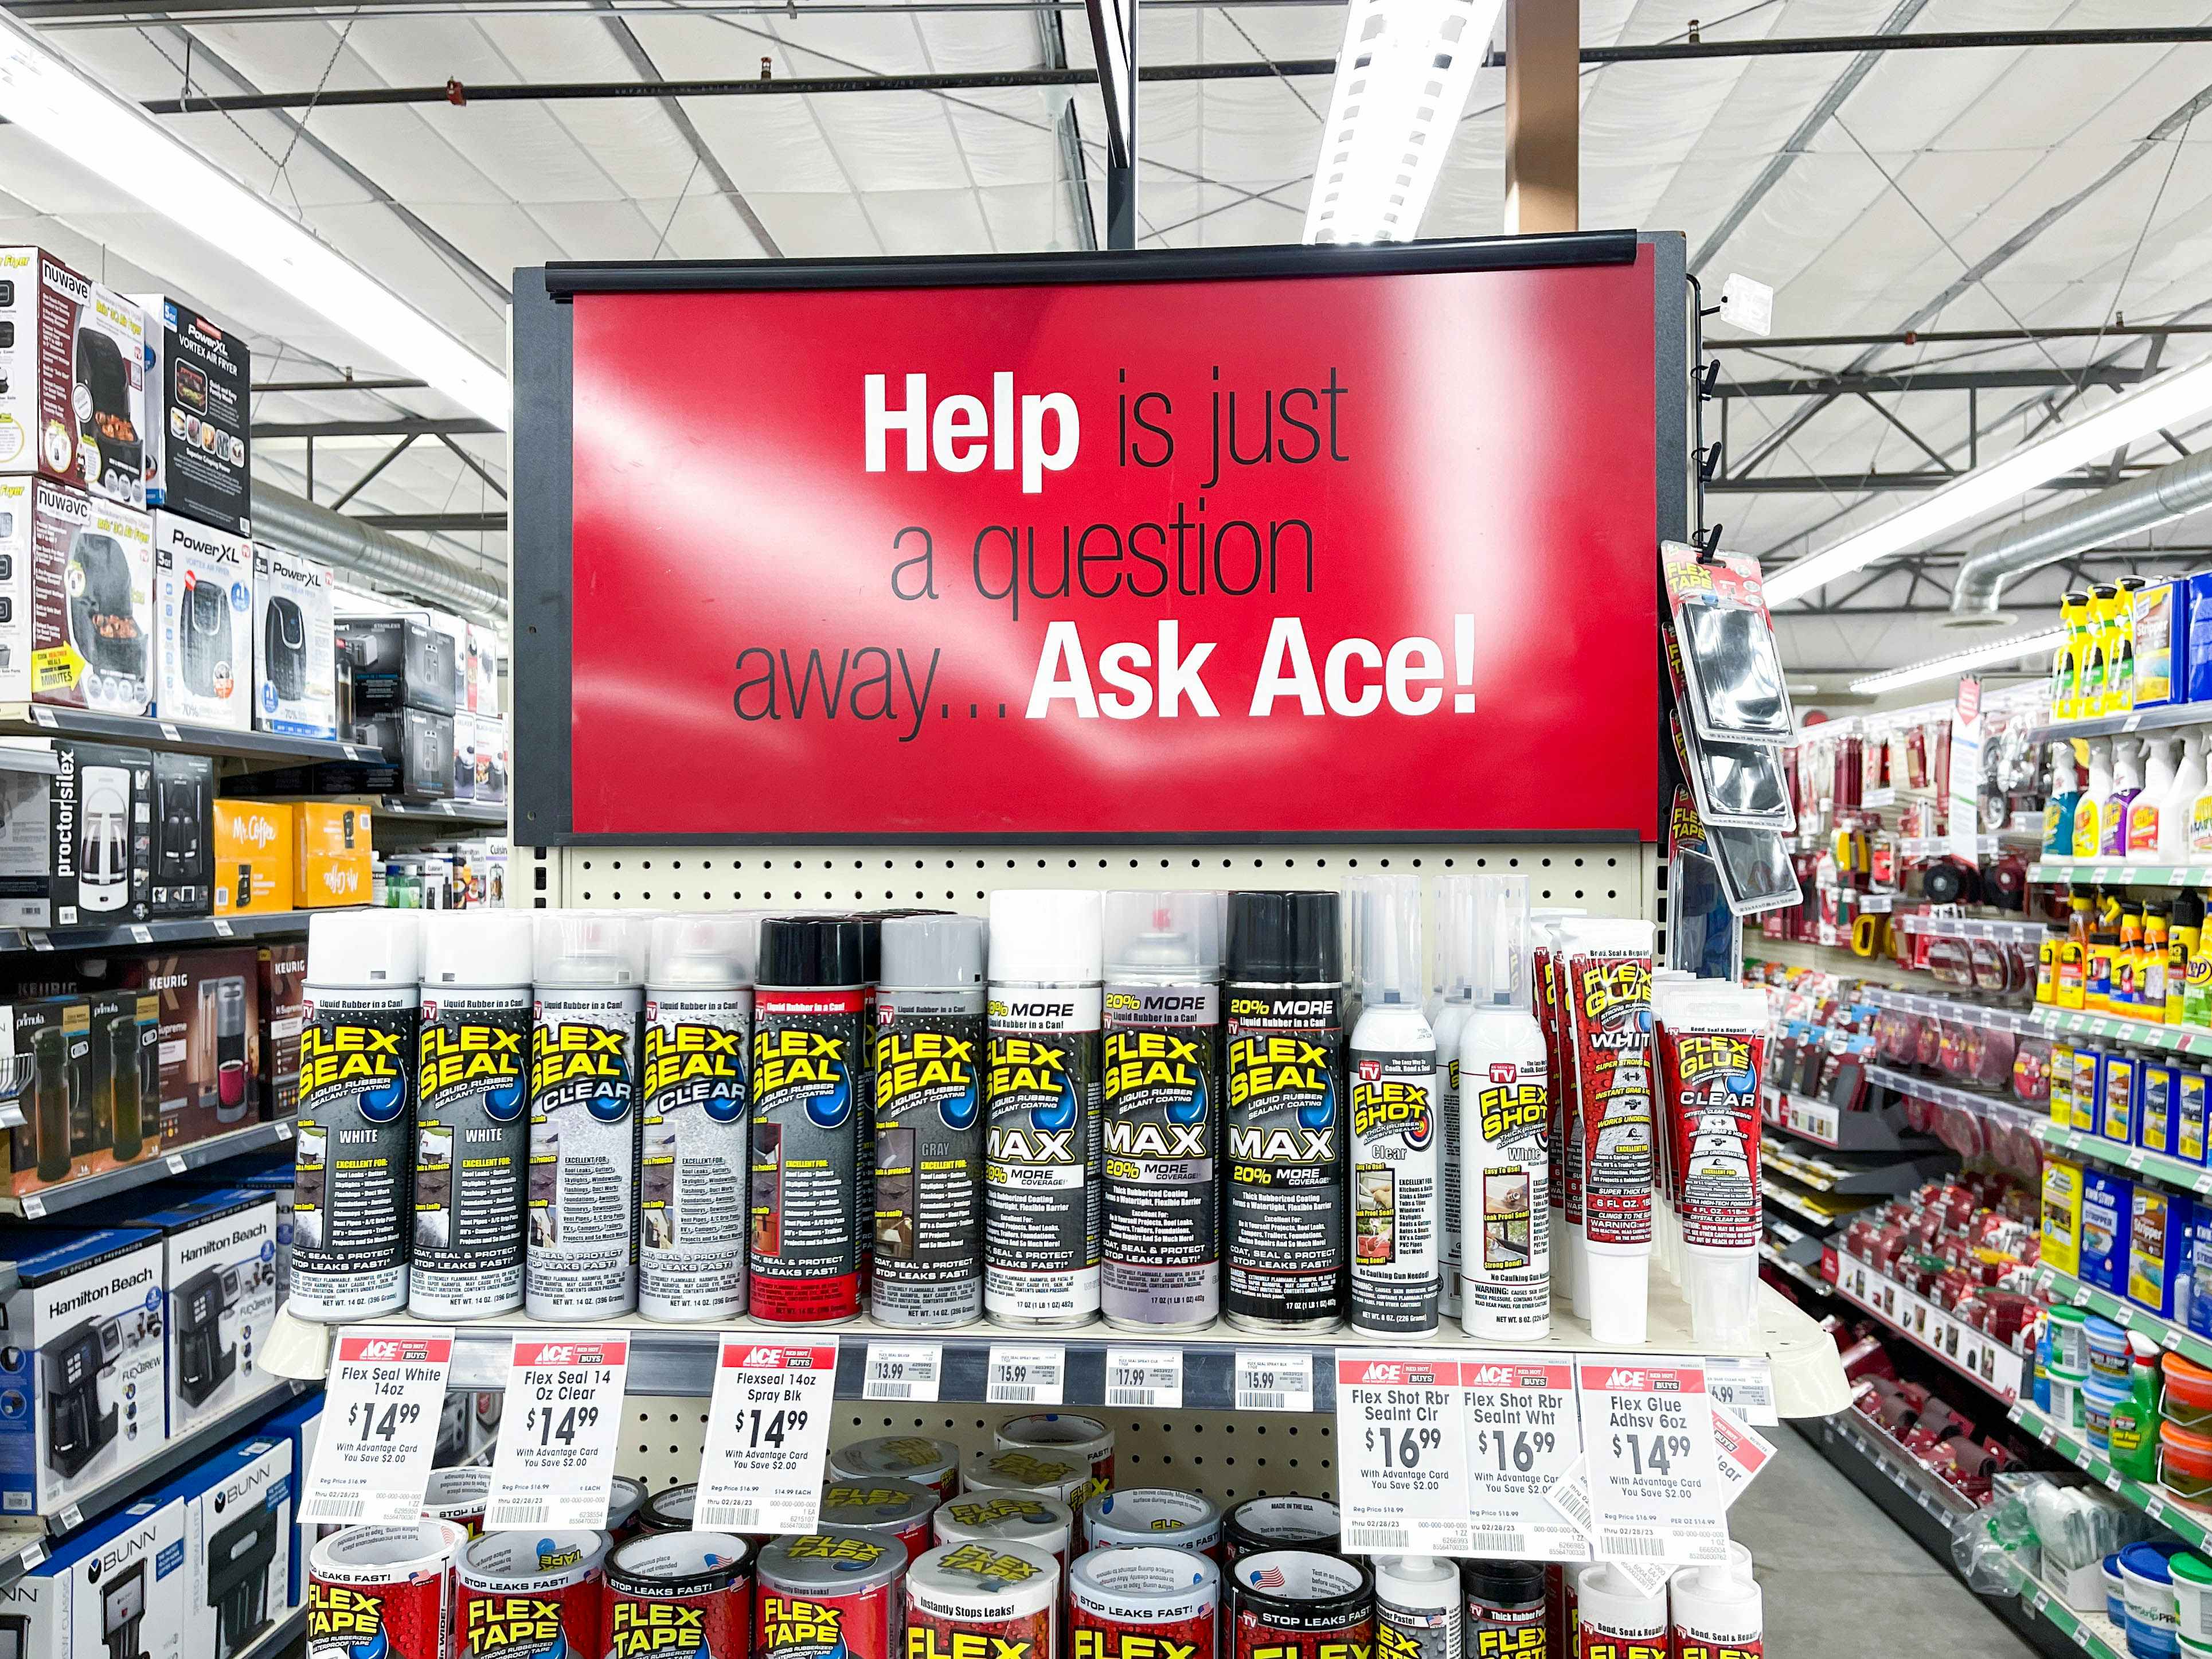 sign about asking for help in a sign in an ace hardware store